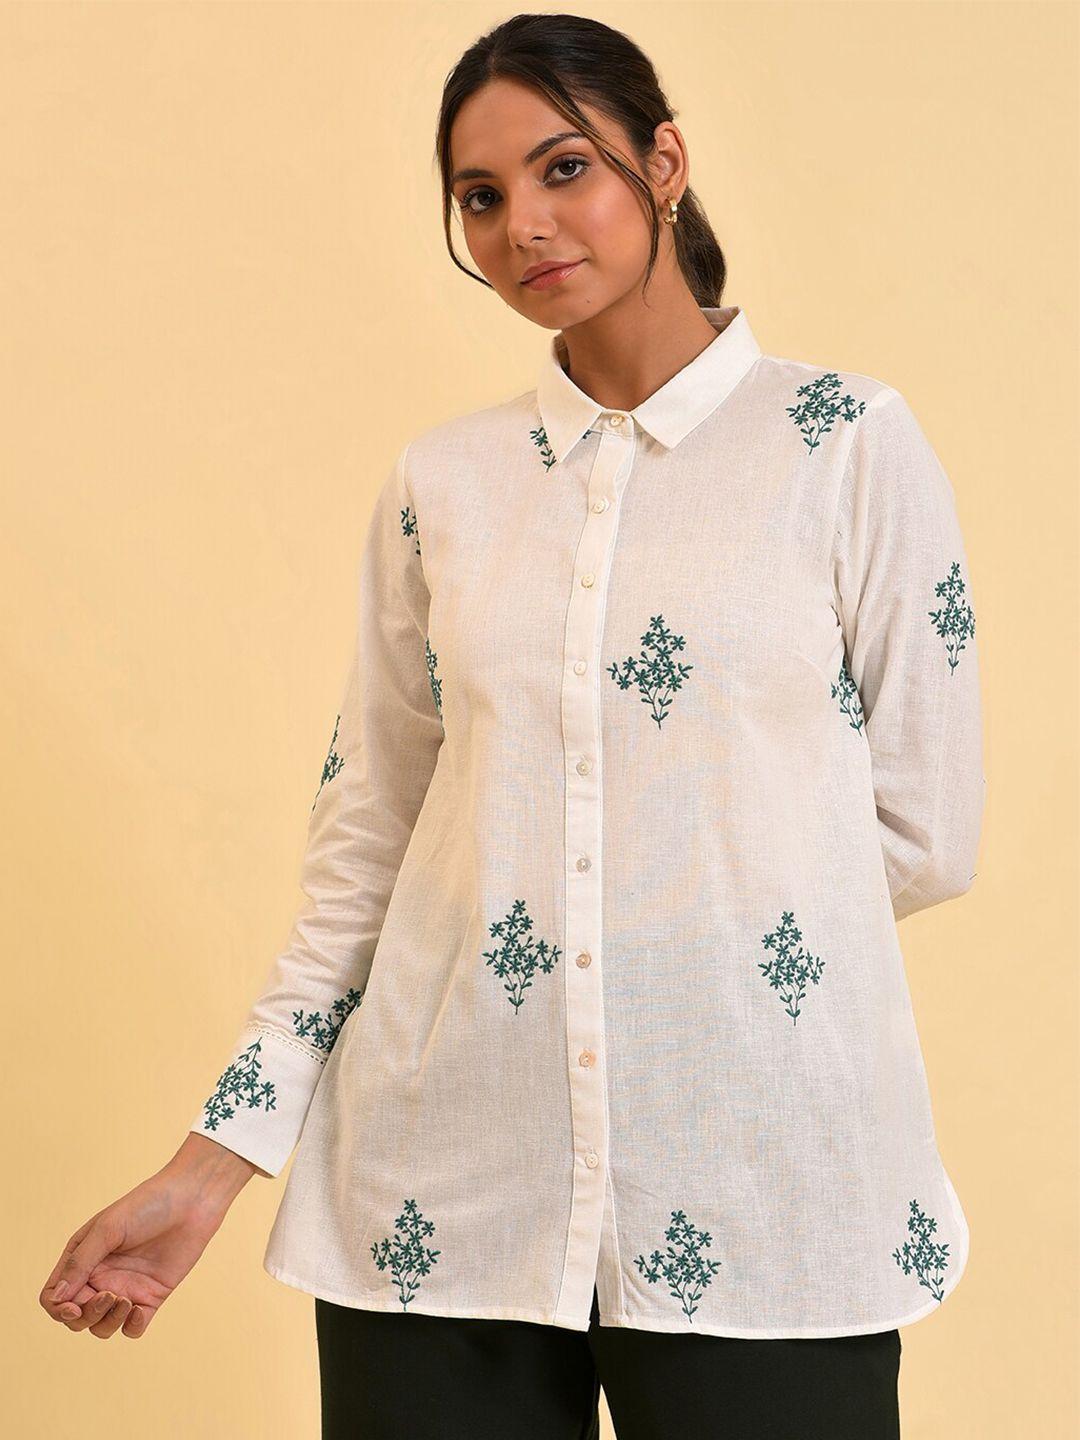 w white floral embroidered cotton shirt style top